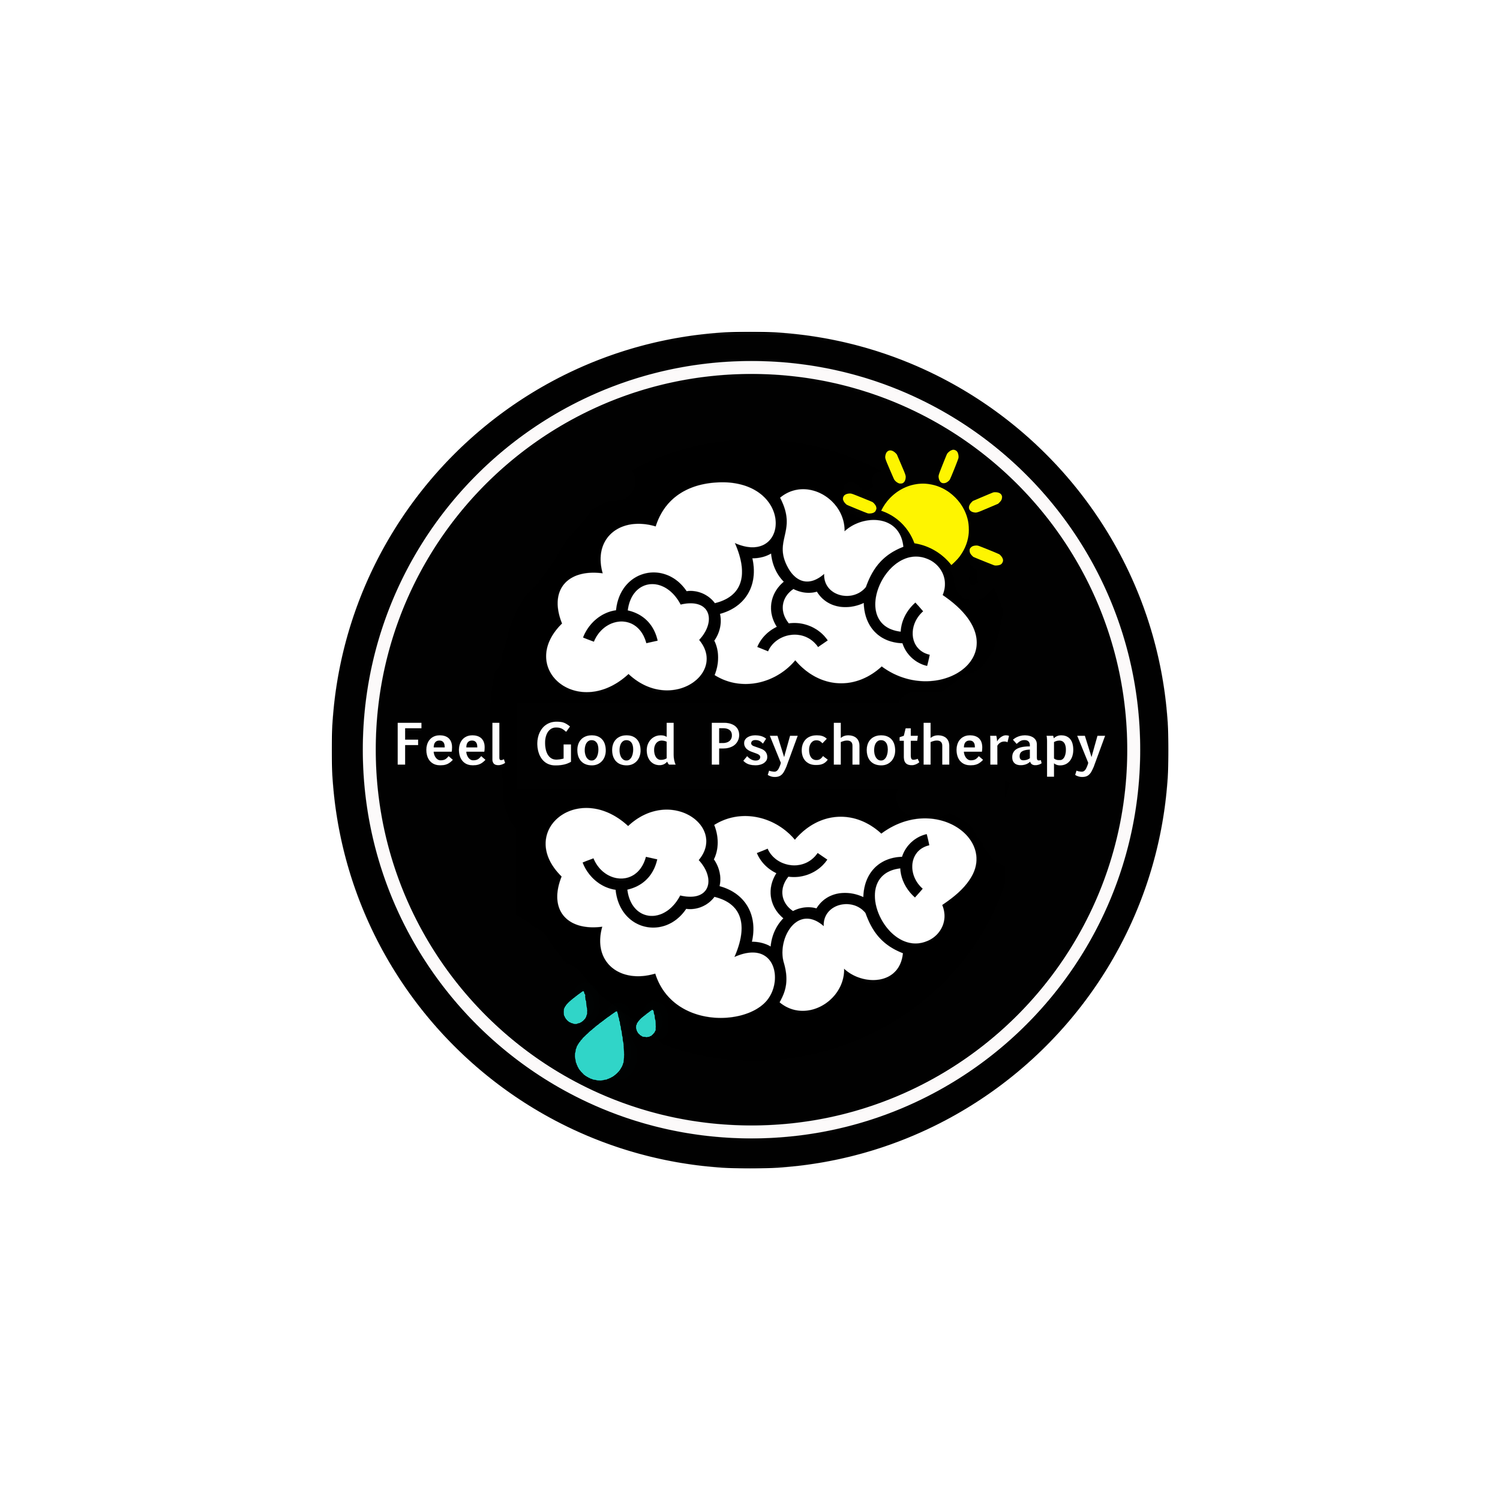 Feel Good Psychotherapy